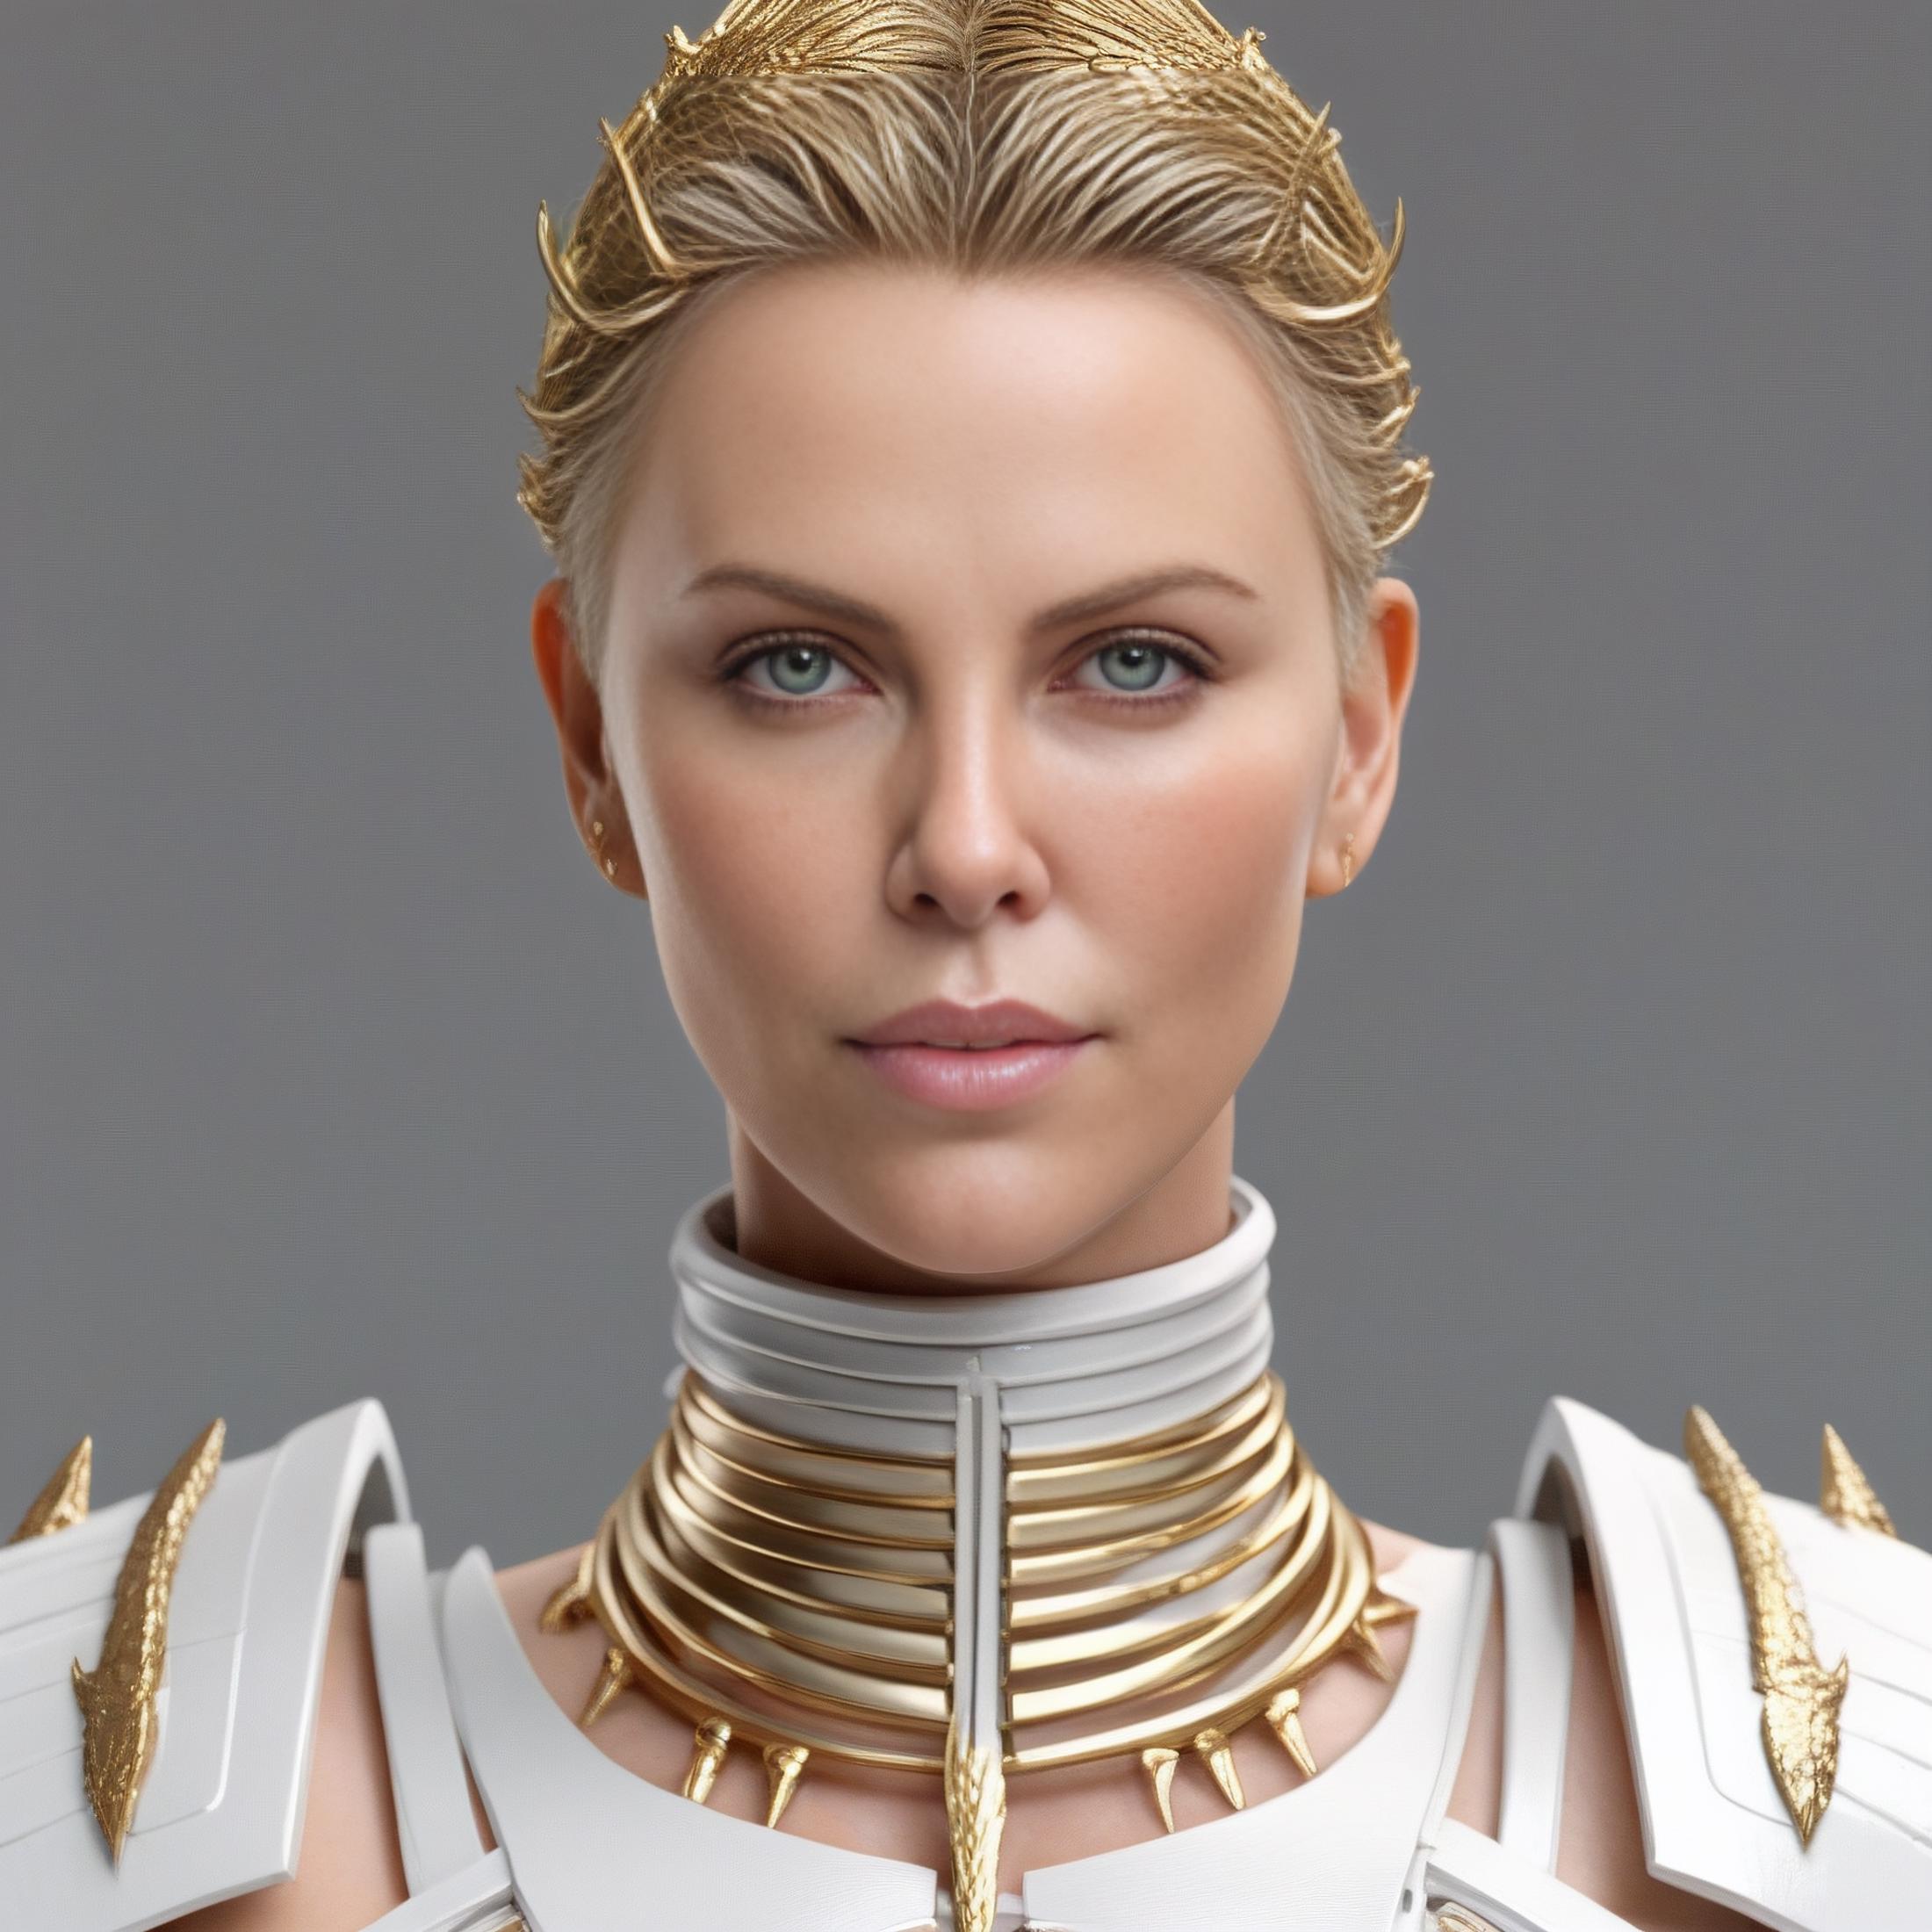 Charlize Theron image by parar20